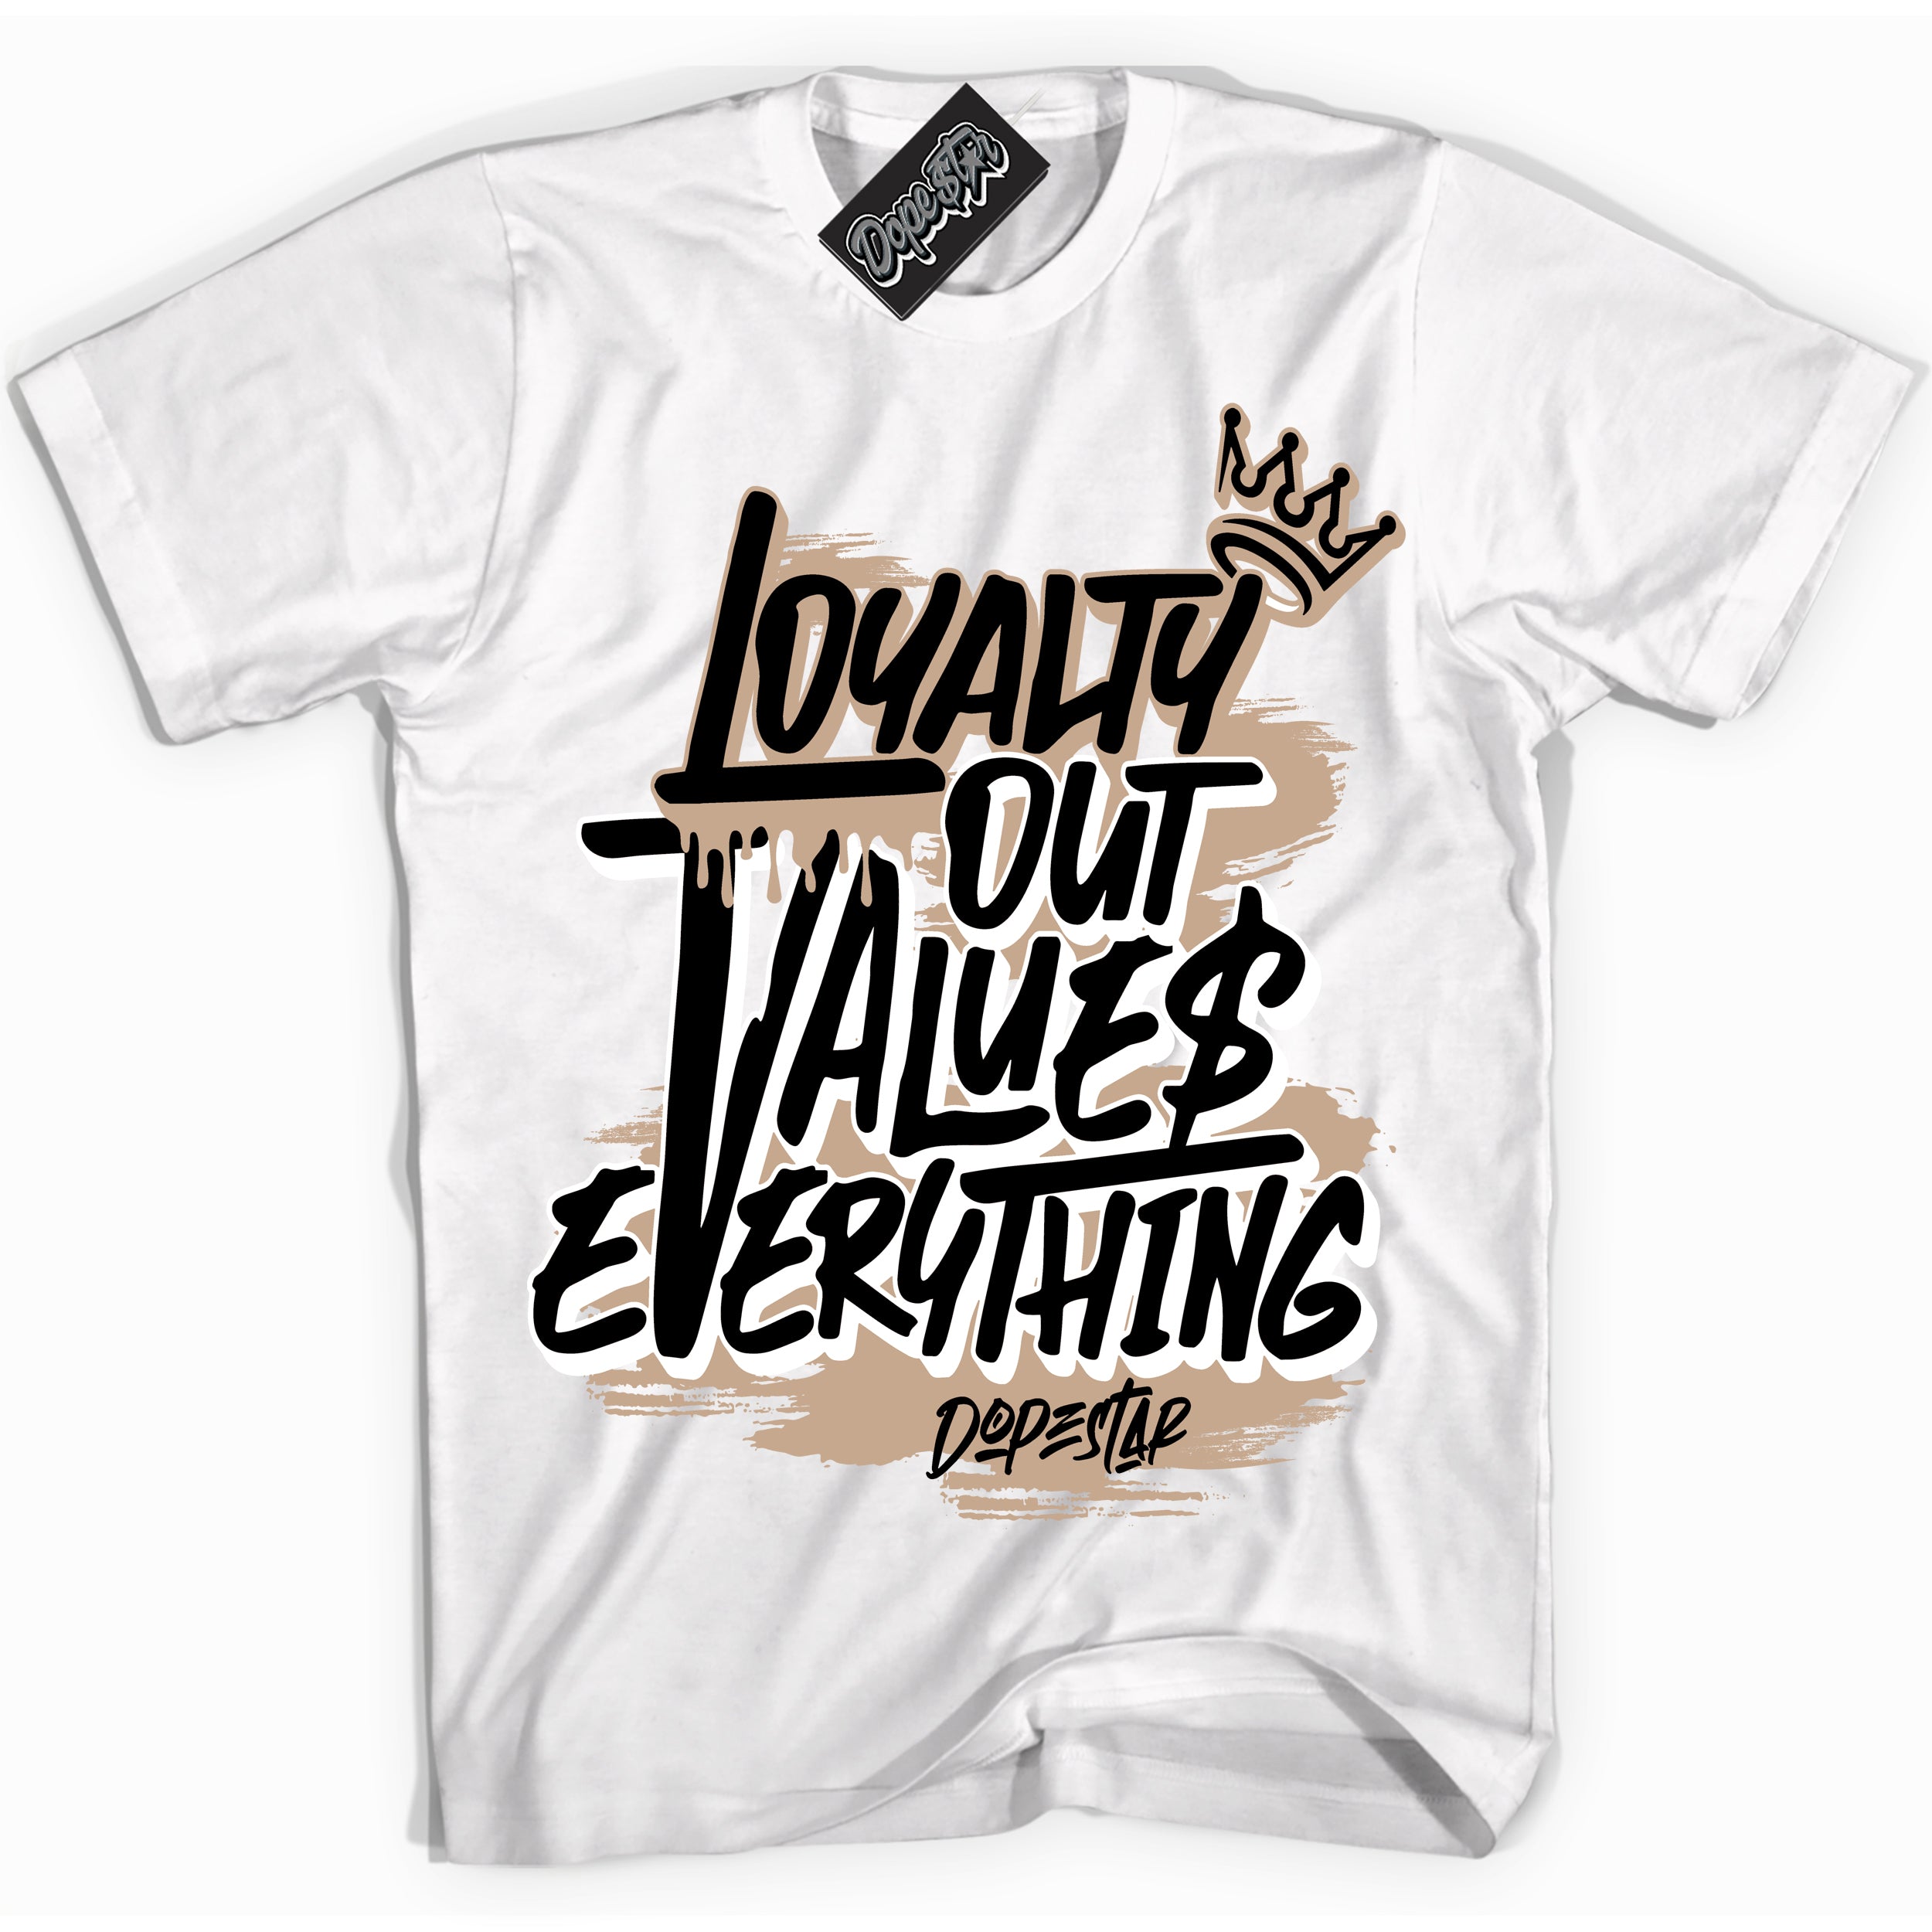 Cool White Shirt with “ Loyalty Out Values Everything” design that perfectly matches Desert 1s Sneakers.